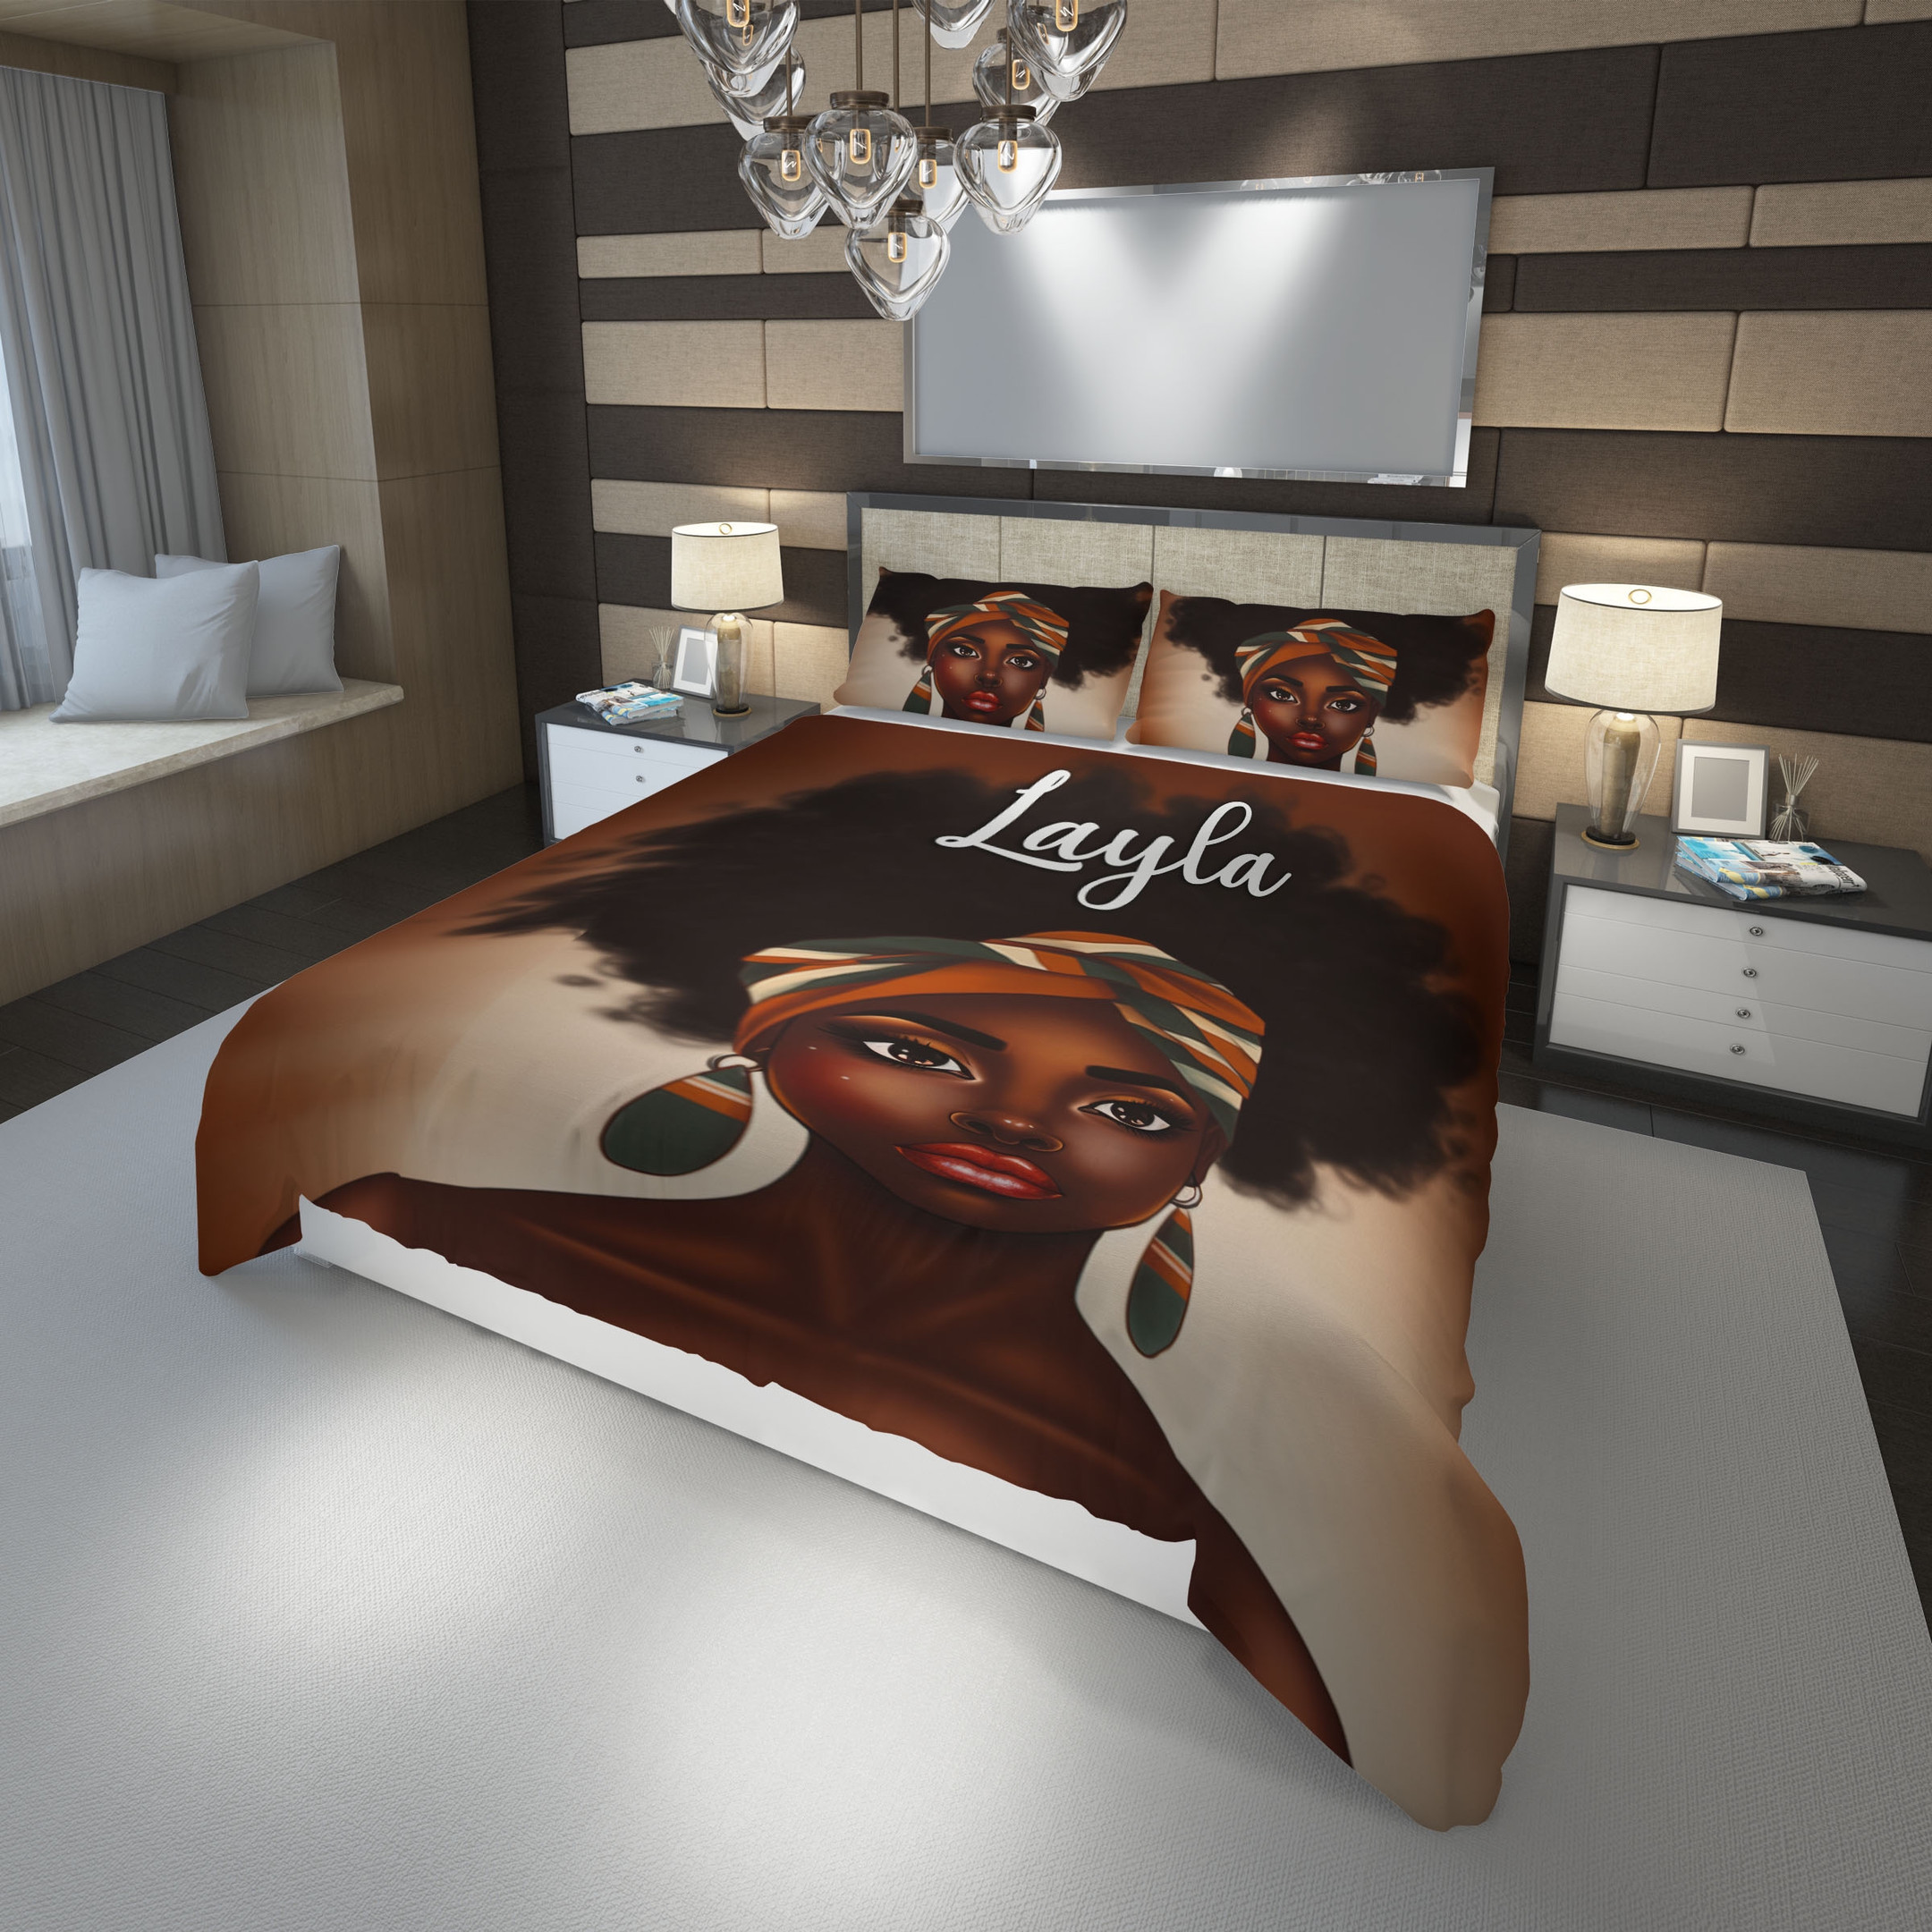 Personalized Black Girl With Turban Bedding Set